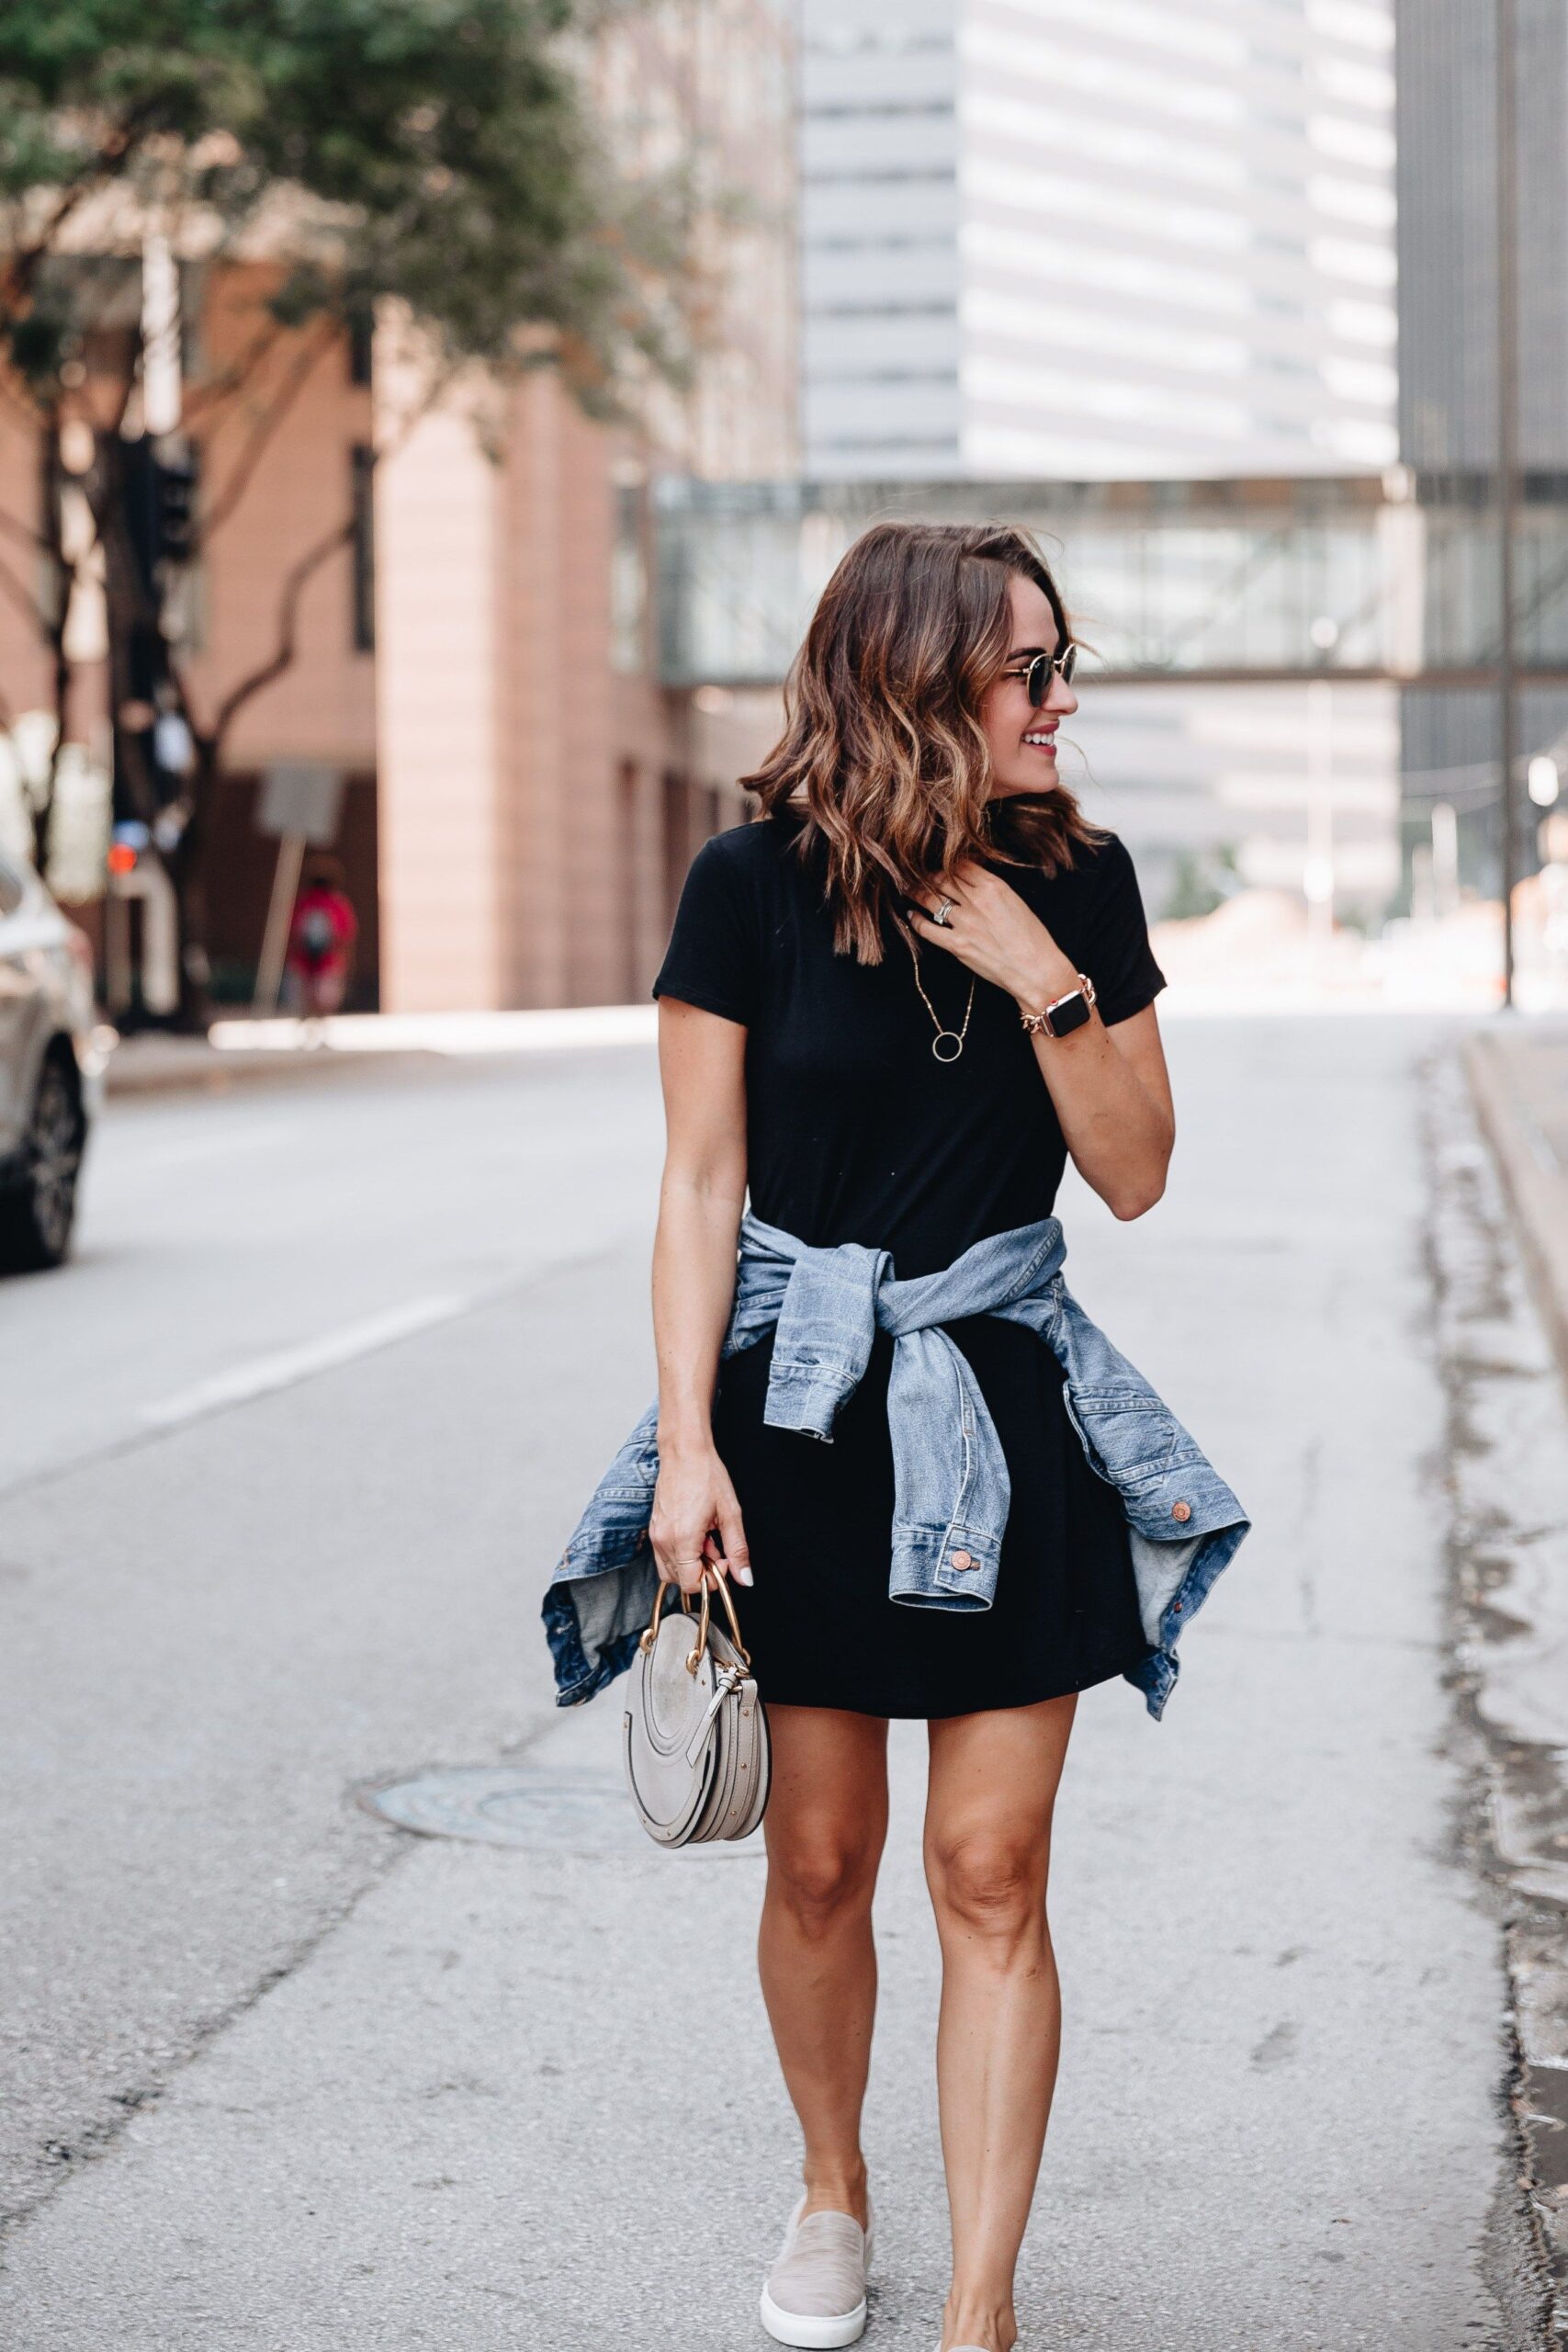 The Ultimate Guide to T-Shirt Dress
Fashion